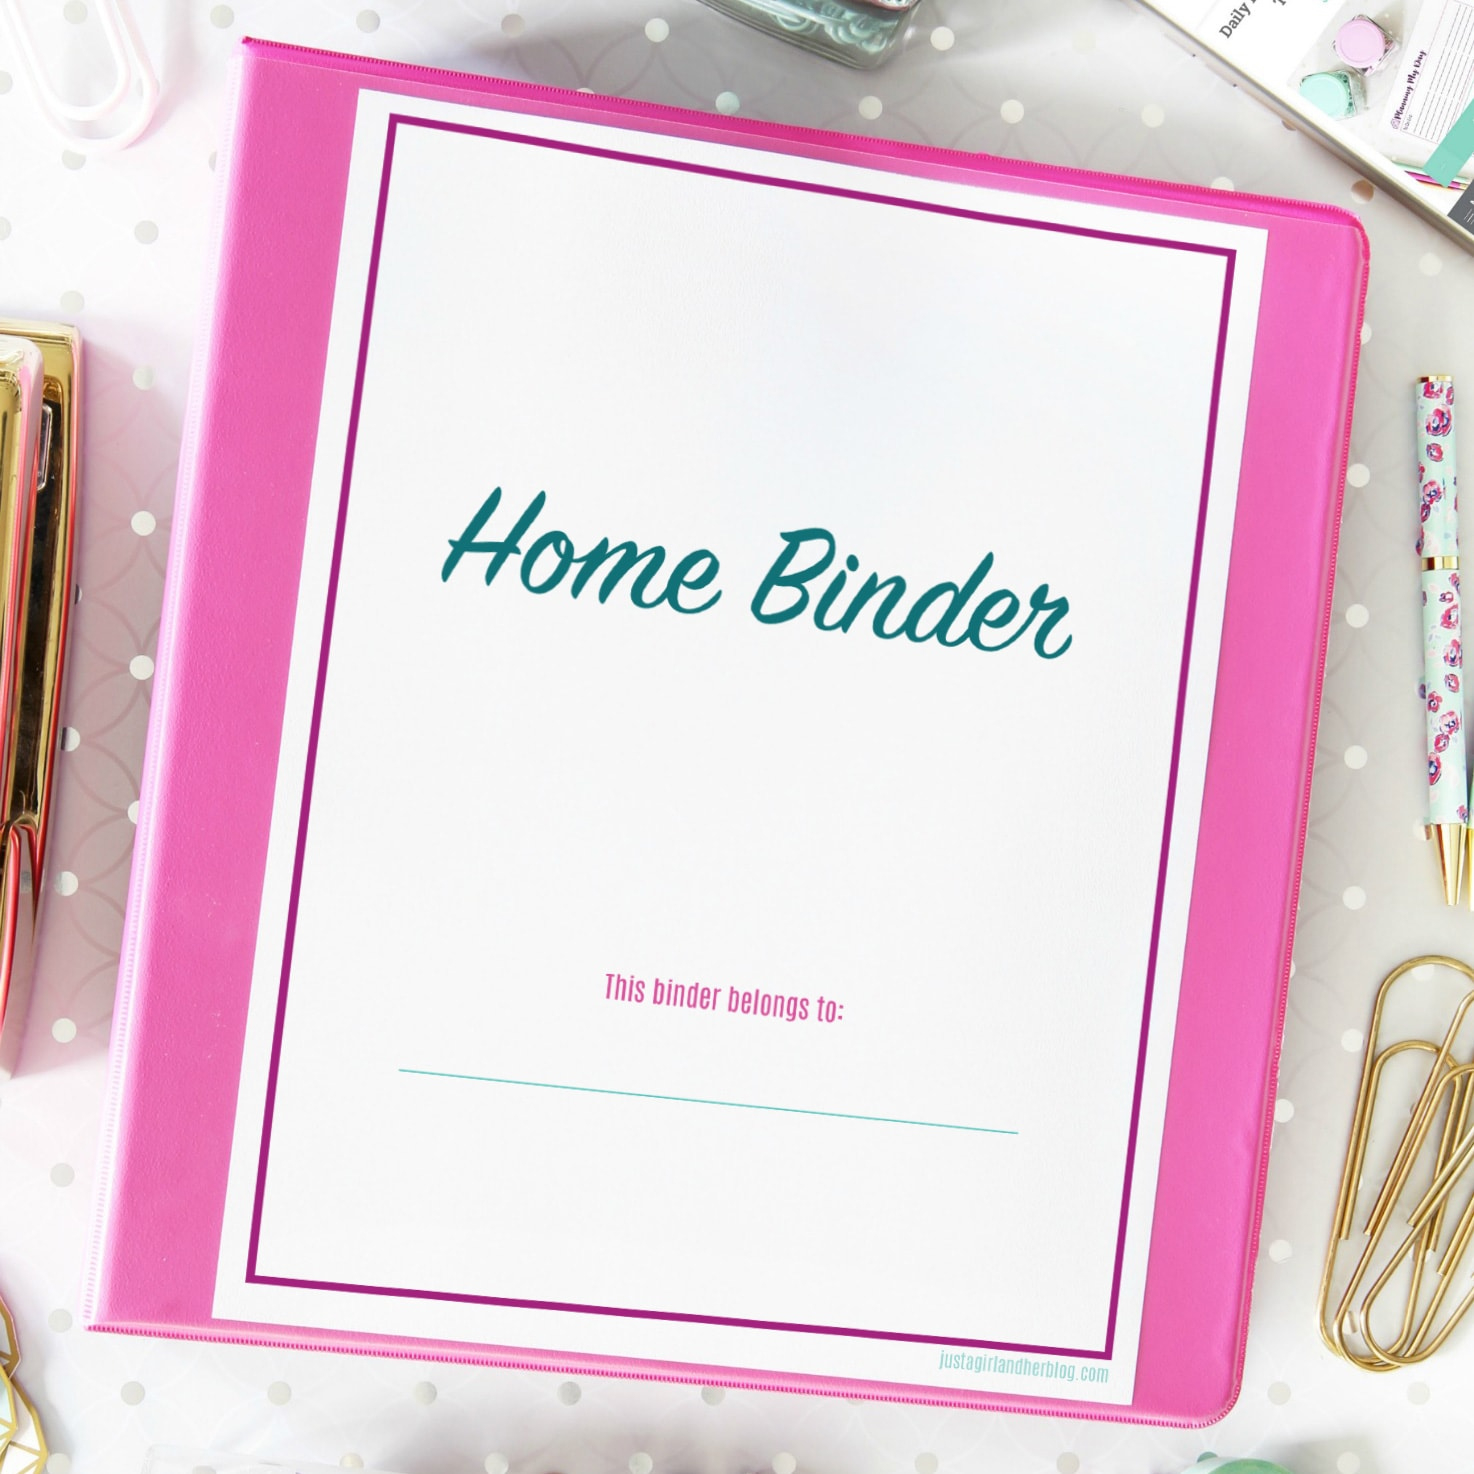 Organized Home Binder With Free Printables! | Abby Organizes with regard to Free Home Management Binder Printables 2025